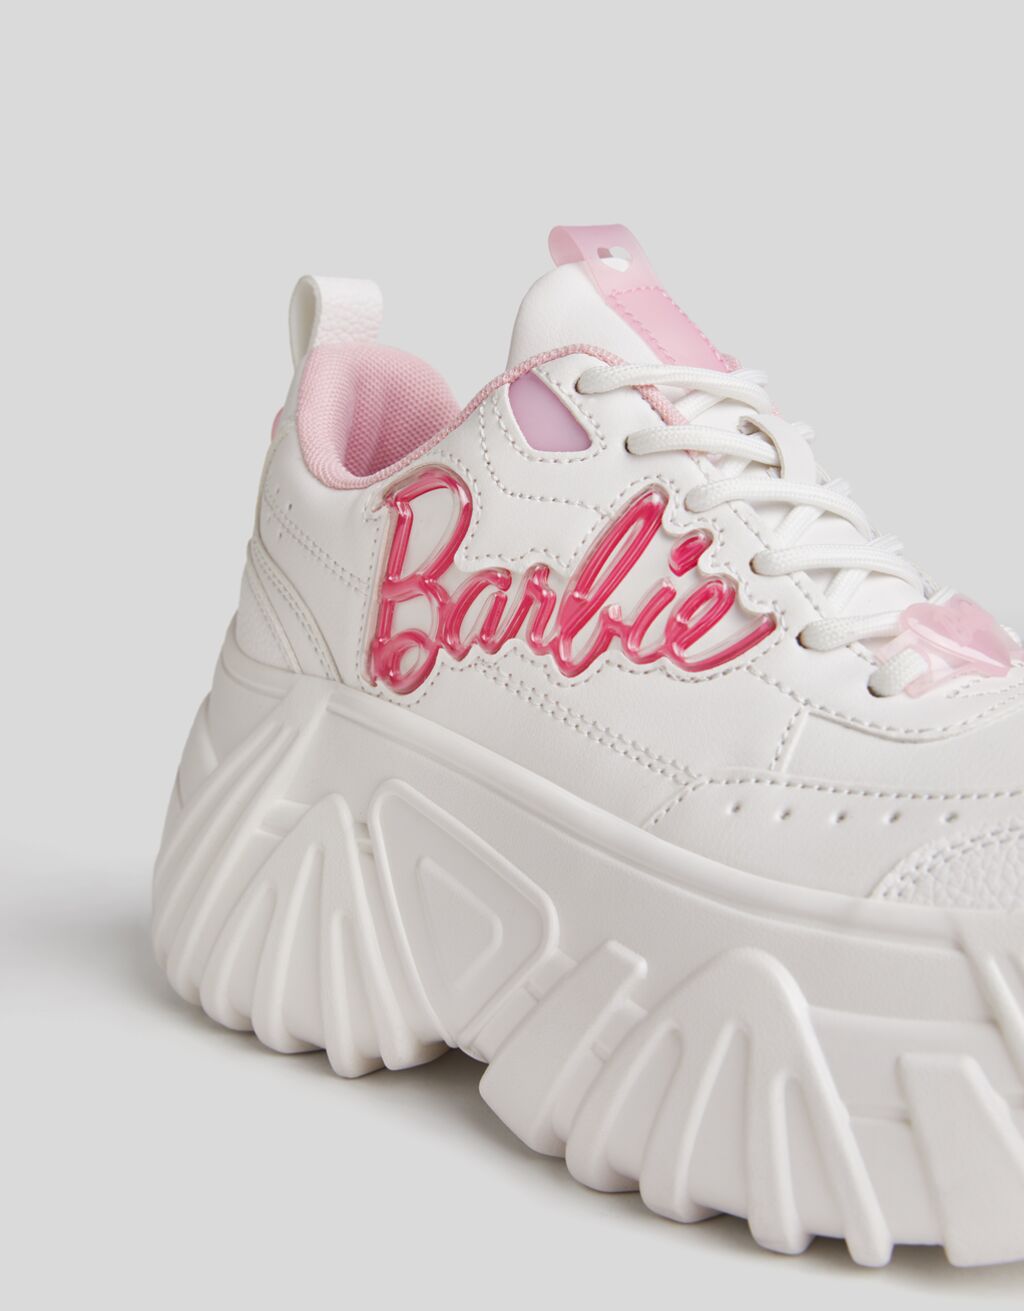 Barbie sneakers from YouLoveIt.com